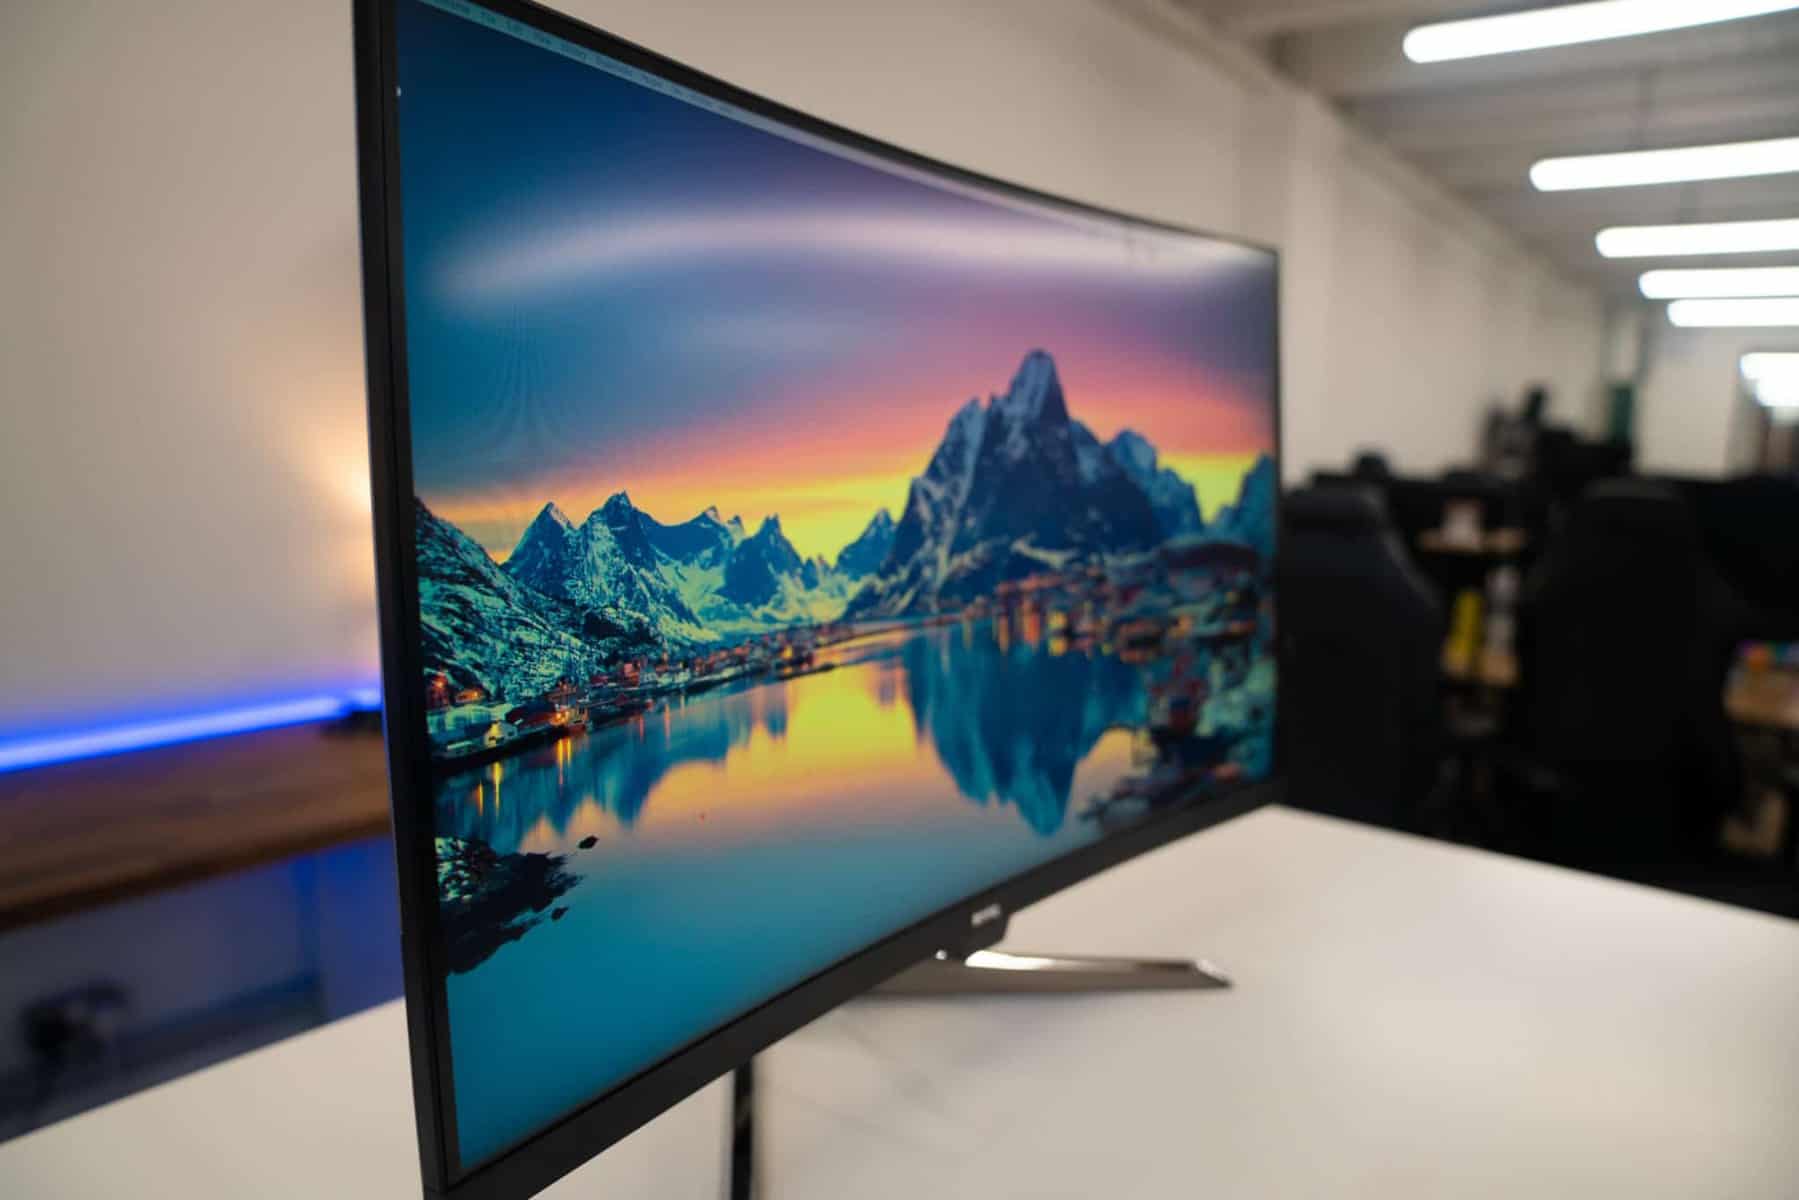 Should I buy a curved gaming monitor?